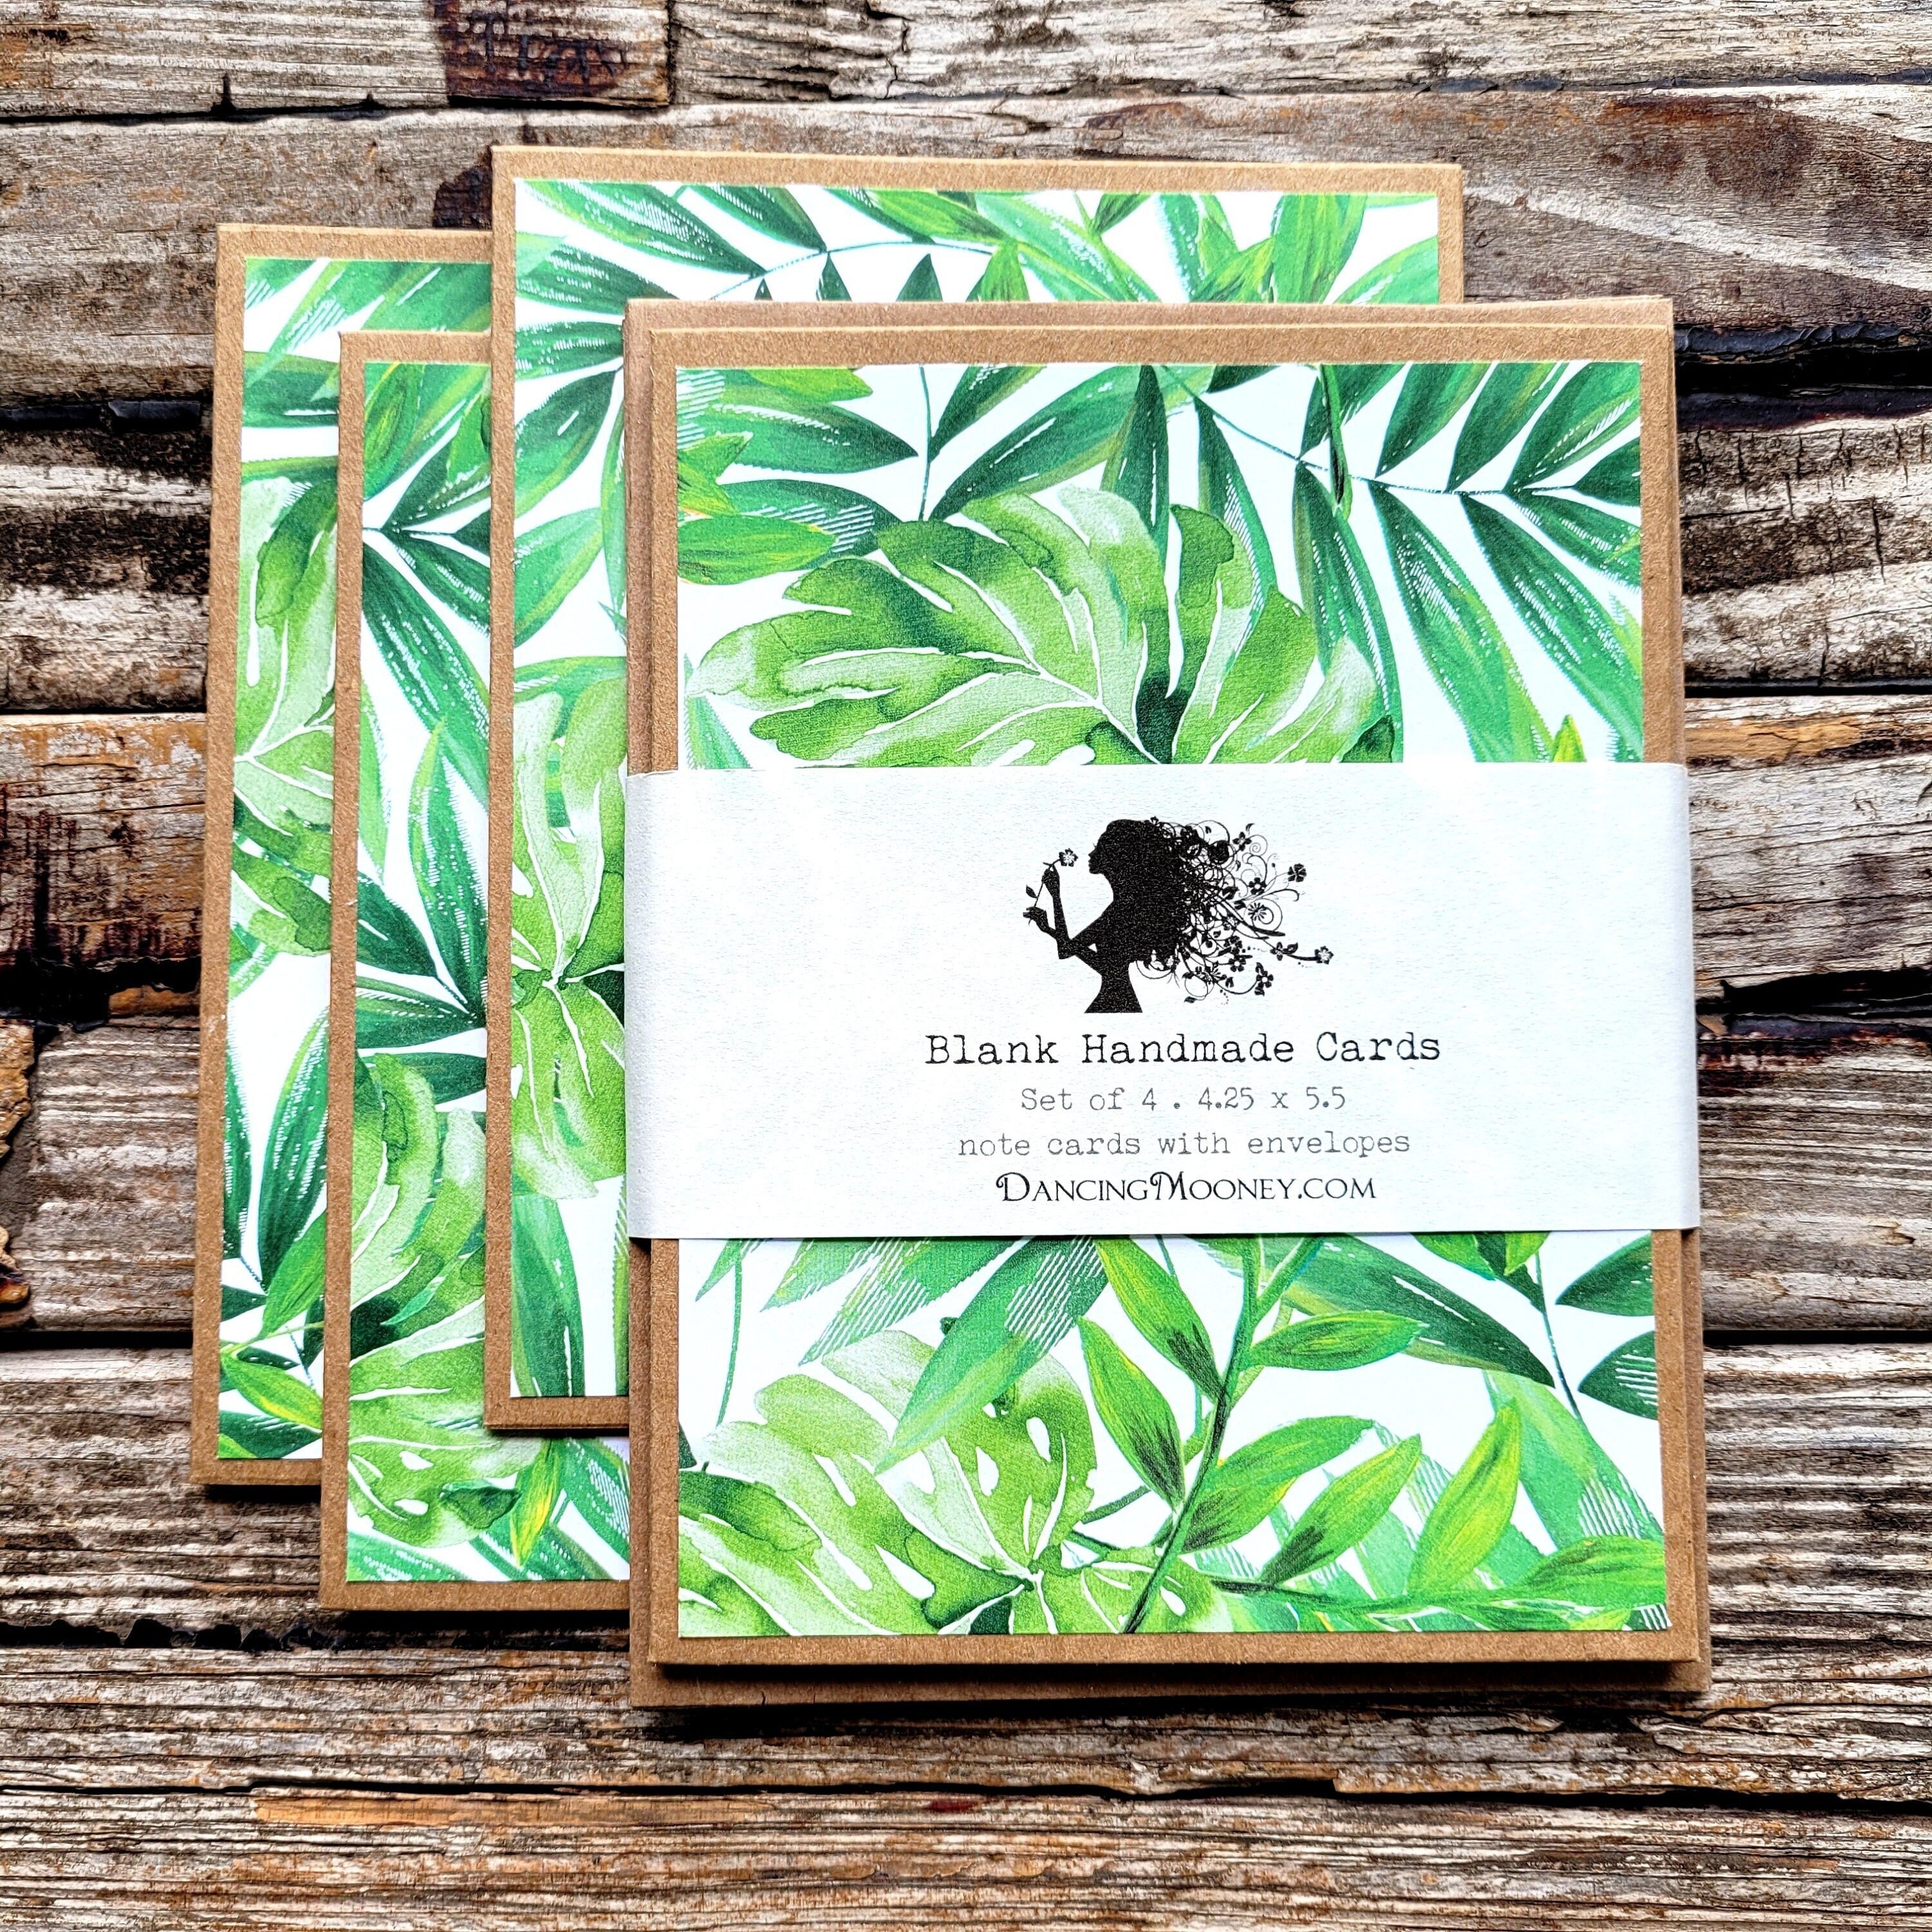 Greenery Note Cards - 4X6 (Set of 50) Blank Greenery Cards - Thick